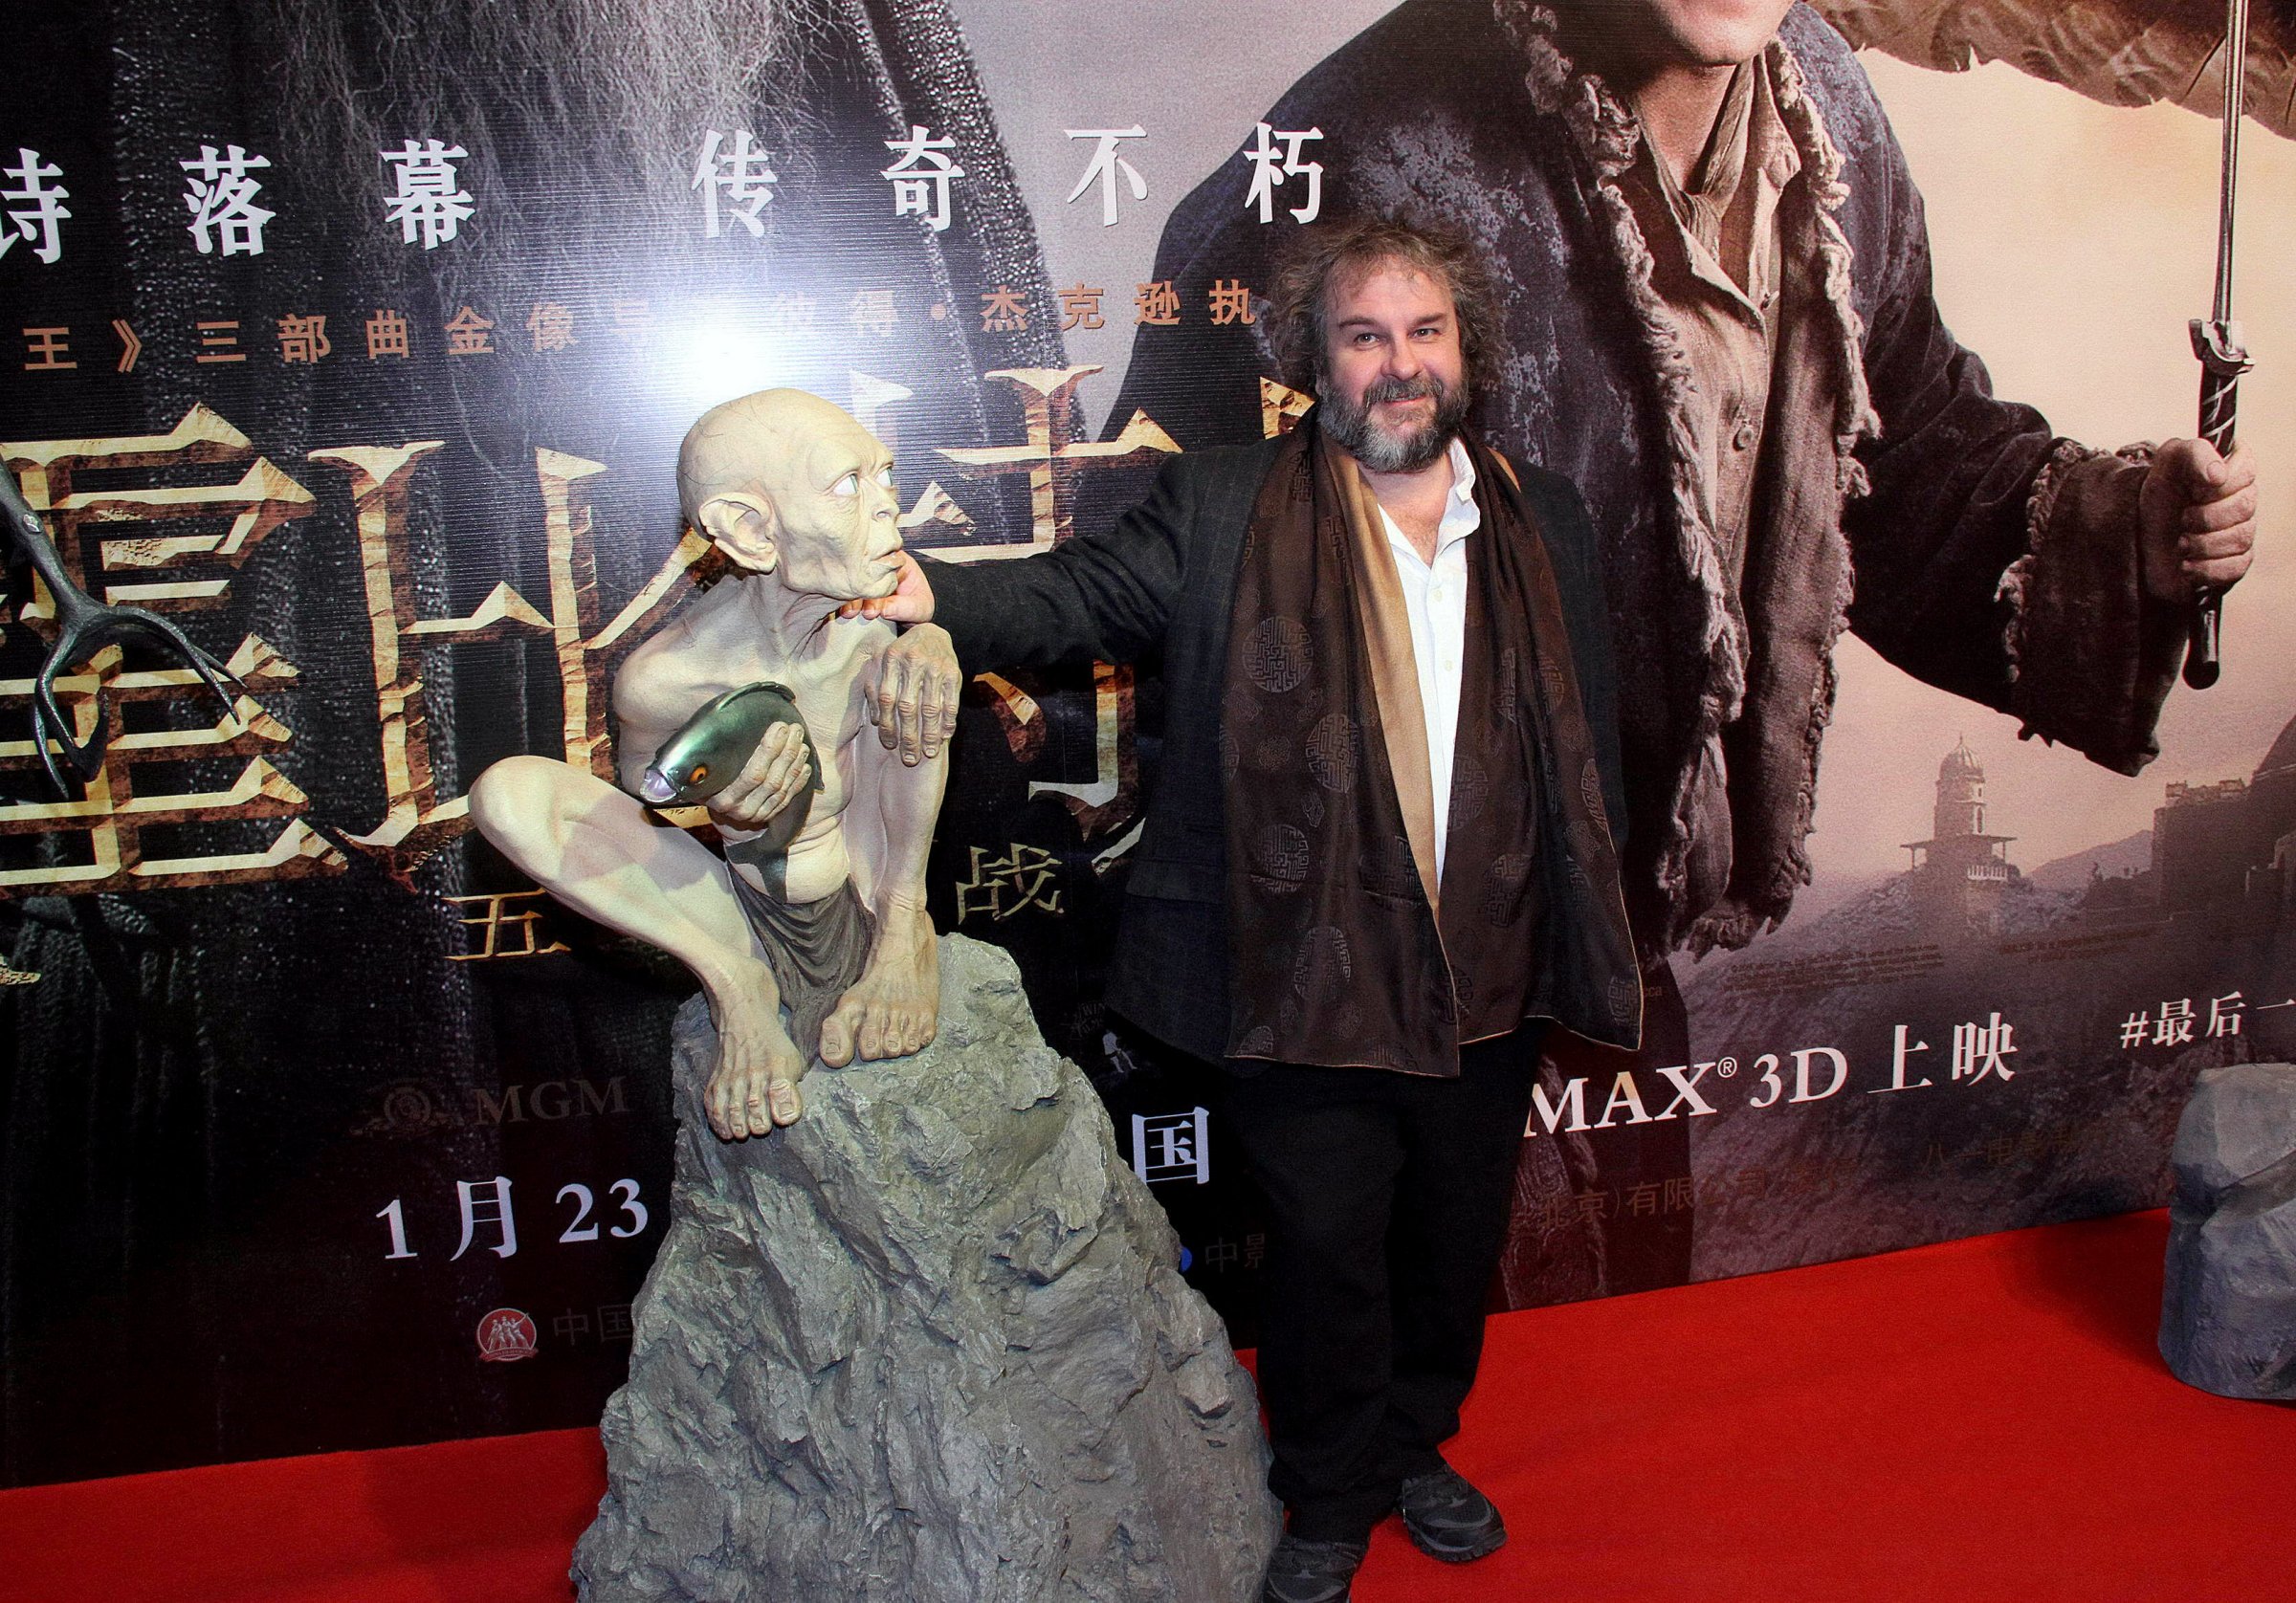 BEIJING, CHINA - JANUARY 20:  (CHINA OUT) Director Peter Jackson attends press conference of new movie "The Hobbit: The Battle Of The Five Armies" on January 20, 2015 in Beijing, China.  (Photo by ChinaFotoPress/ChinaFotoPress via Getty Images)